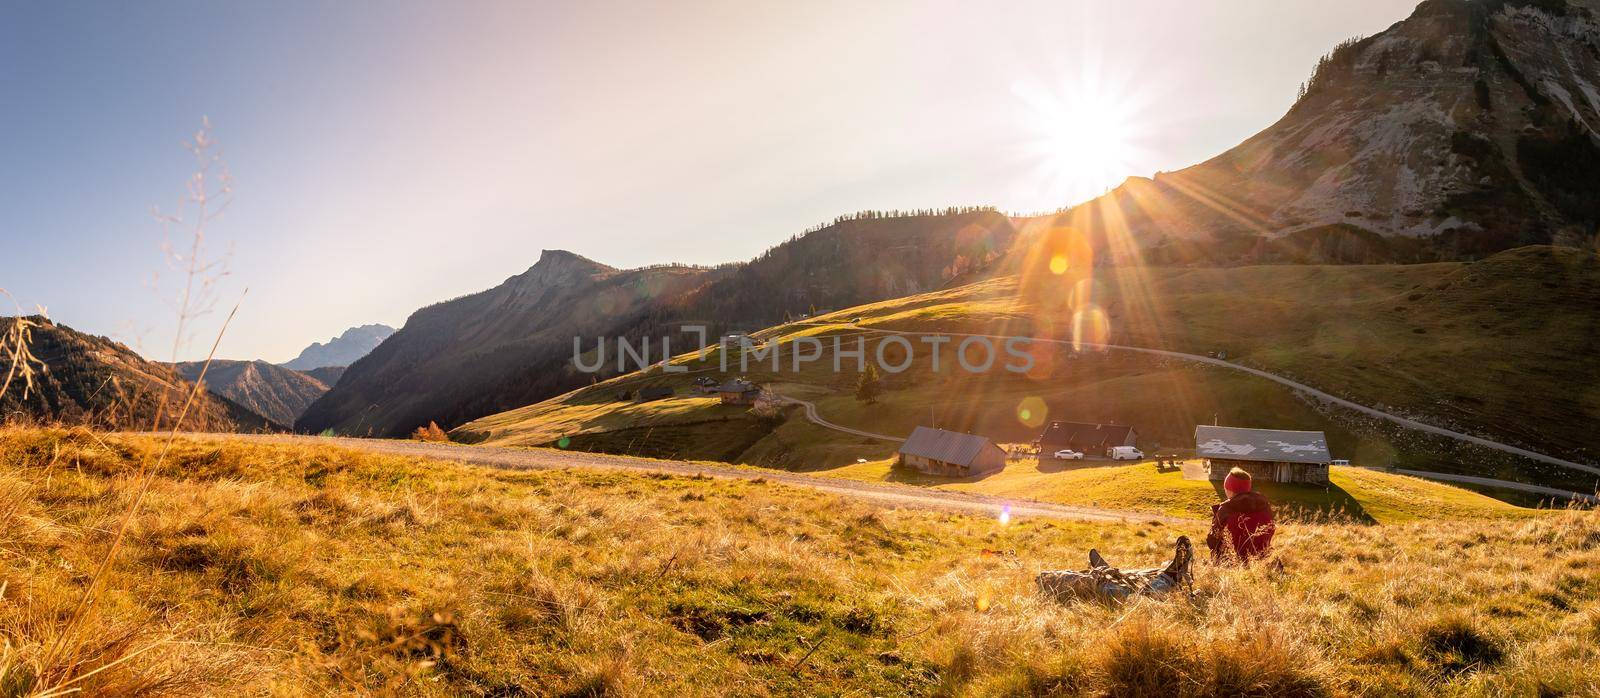 Woman in sportswear is enjoying the sunset in the mountains: sitting on the ground and enjoying the view. Alpes, Austria